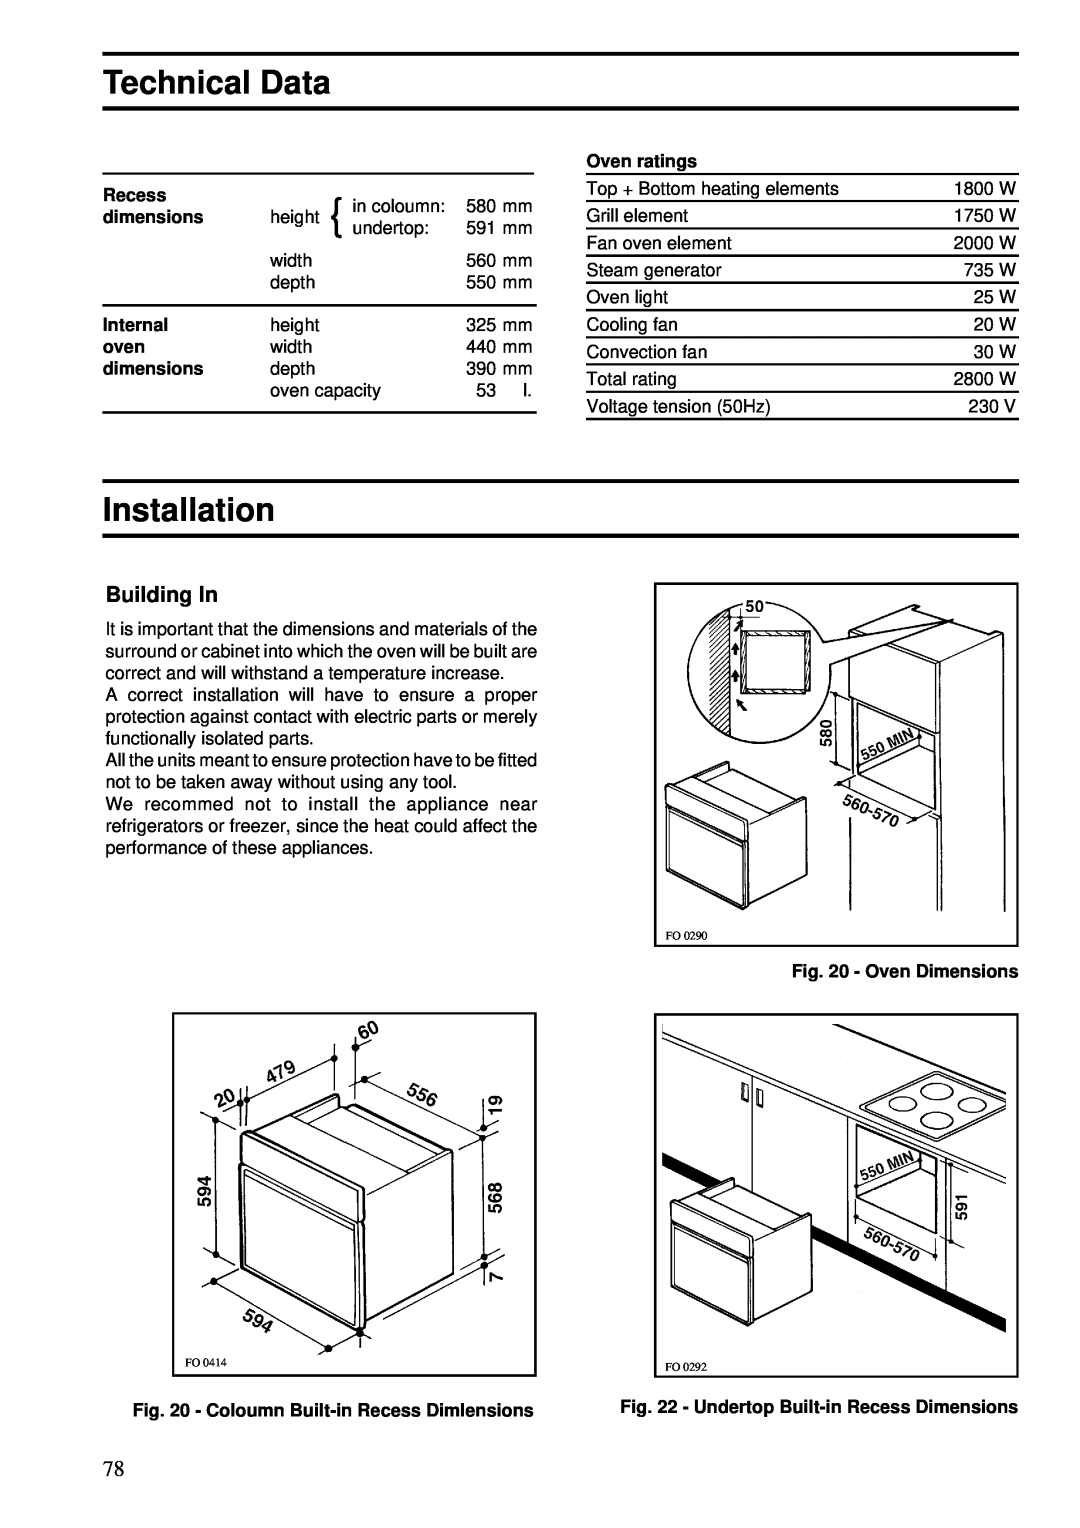 Zanussi ZBS 862 manual Technical Data, Installation, Building In, Recess, dimensions, Internal, oven, Oven ratings 